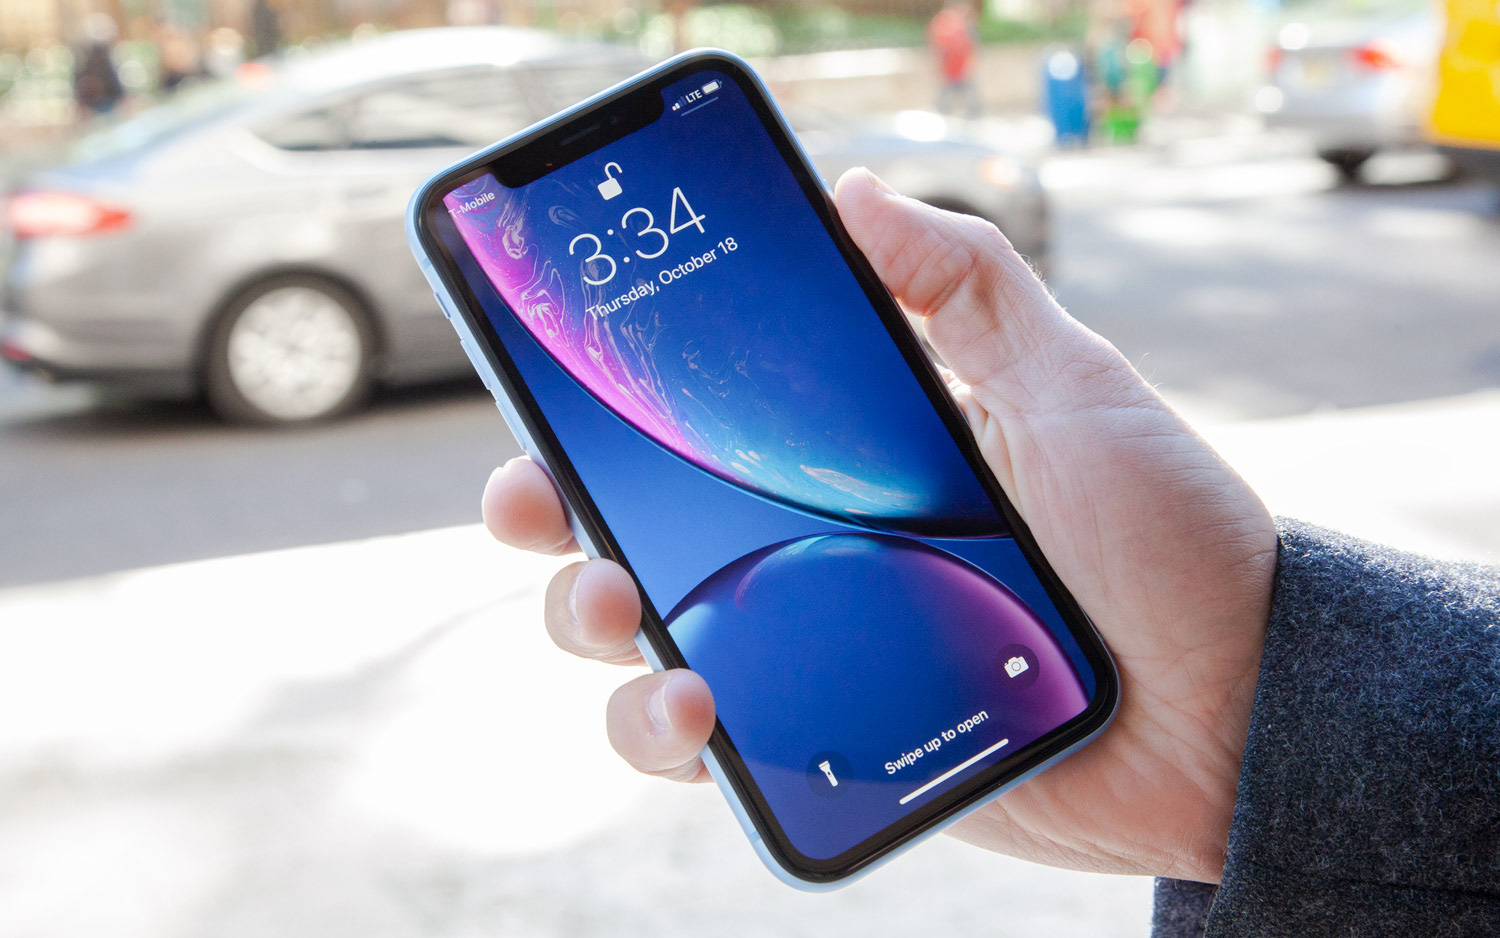 Buy Unlocked iPhone XR, Get 3 Free Months of Service Tom's Guide